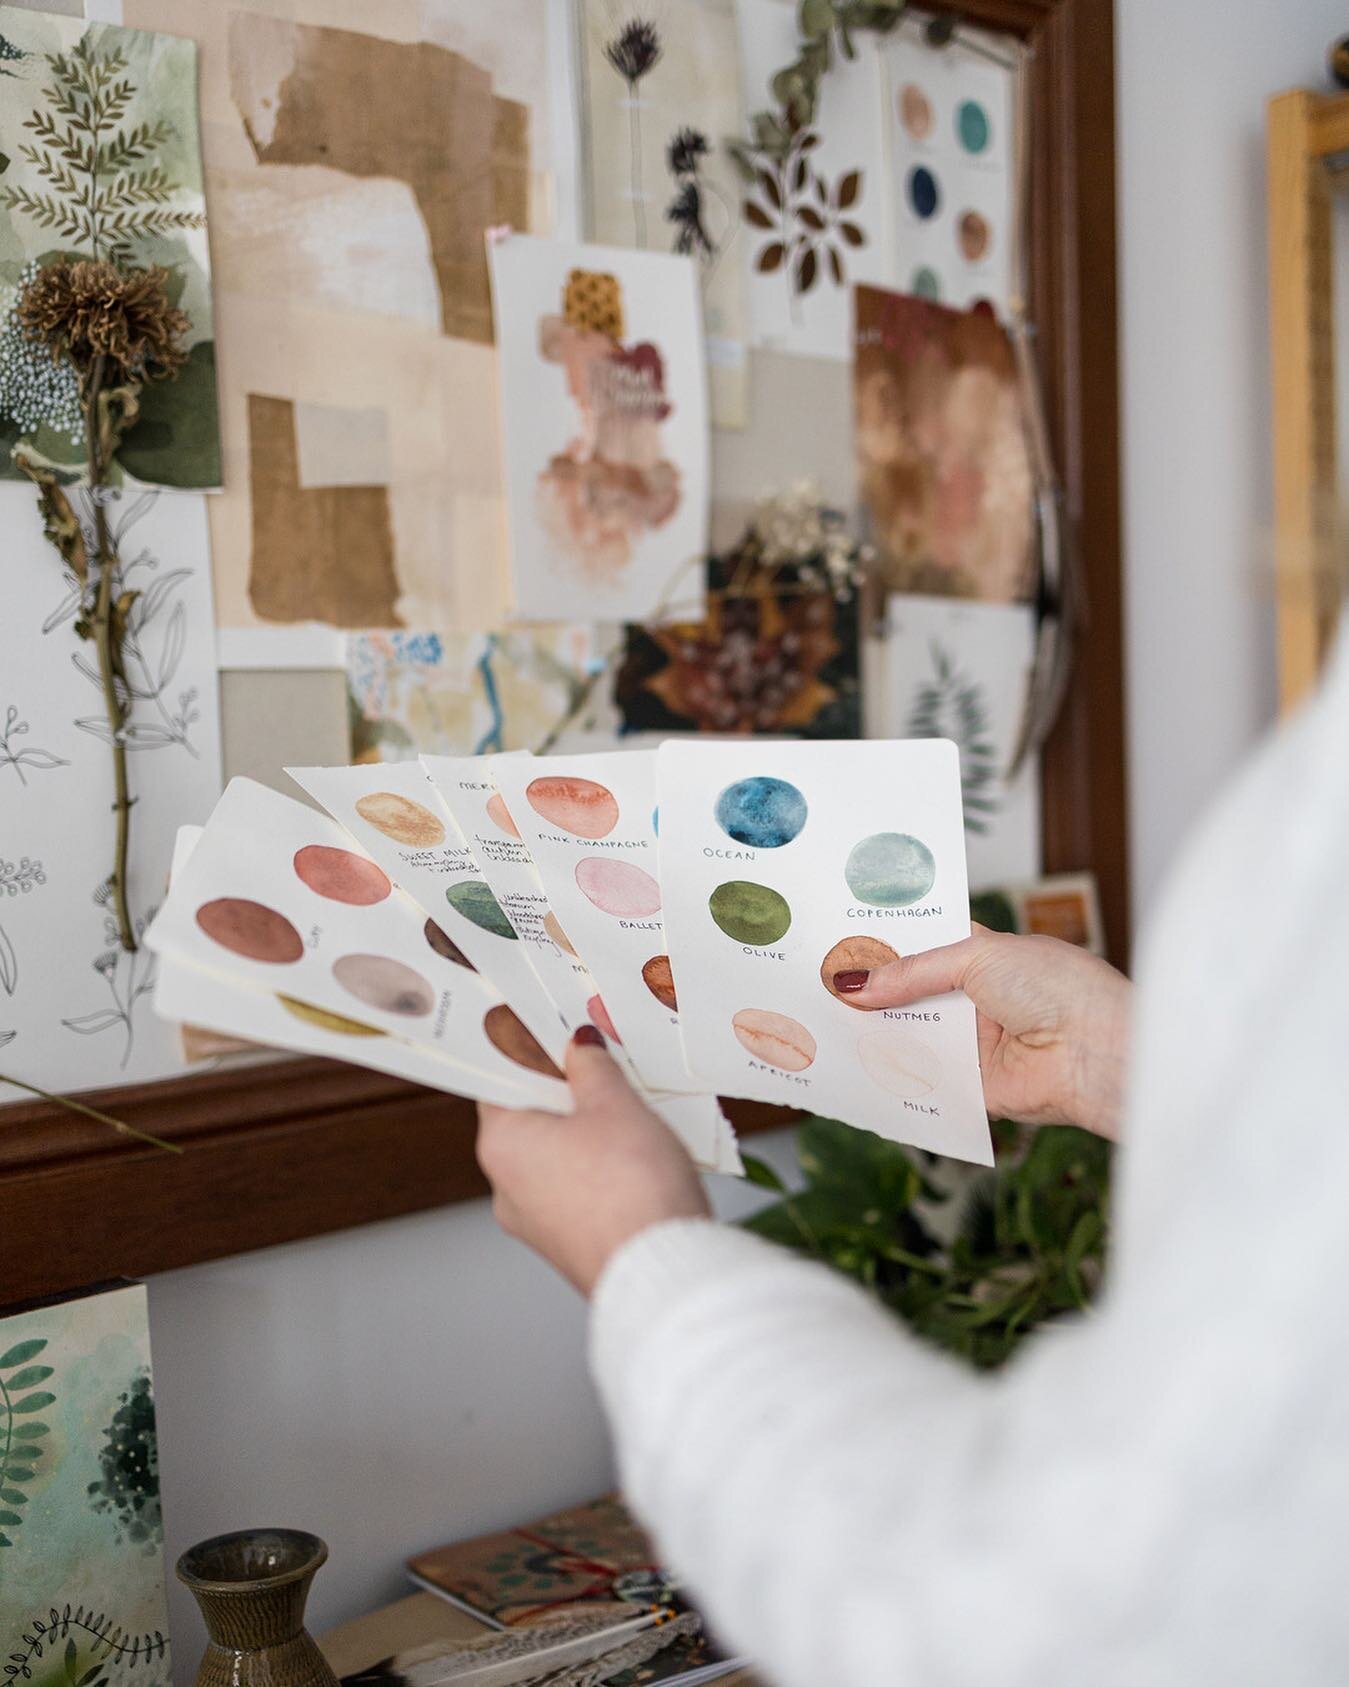 In this week&rsquo;s YouTube video, I'm cleaning the studio, changing up my mood board, and filling up my inspiration cup 🎨☕ with books, art, and &ldquo;ready to create&rdquo; vibes! Do you love those kinds of days? I do 🙋&zwj;♀️
⠀
#modernmixedmedi